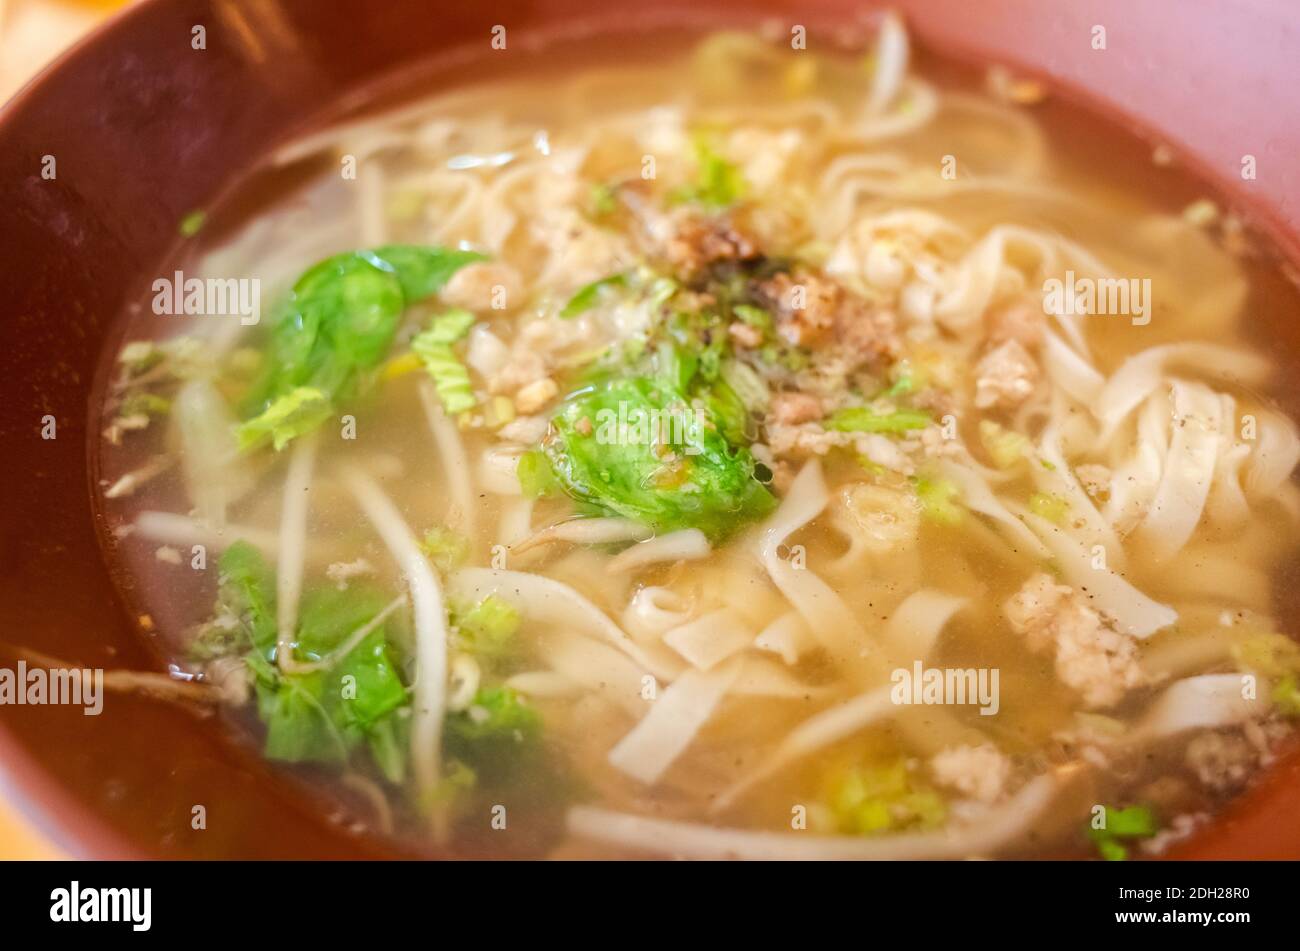 Taiwanese traditional soup noodles Stock Photo